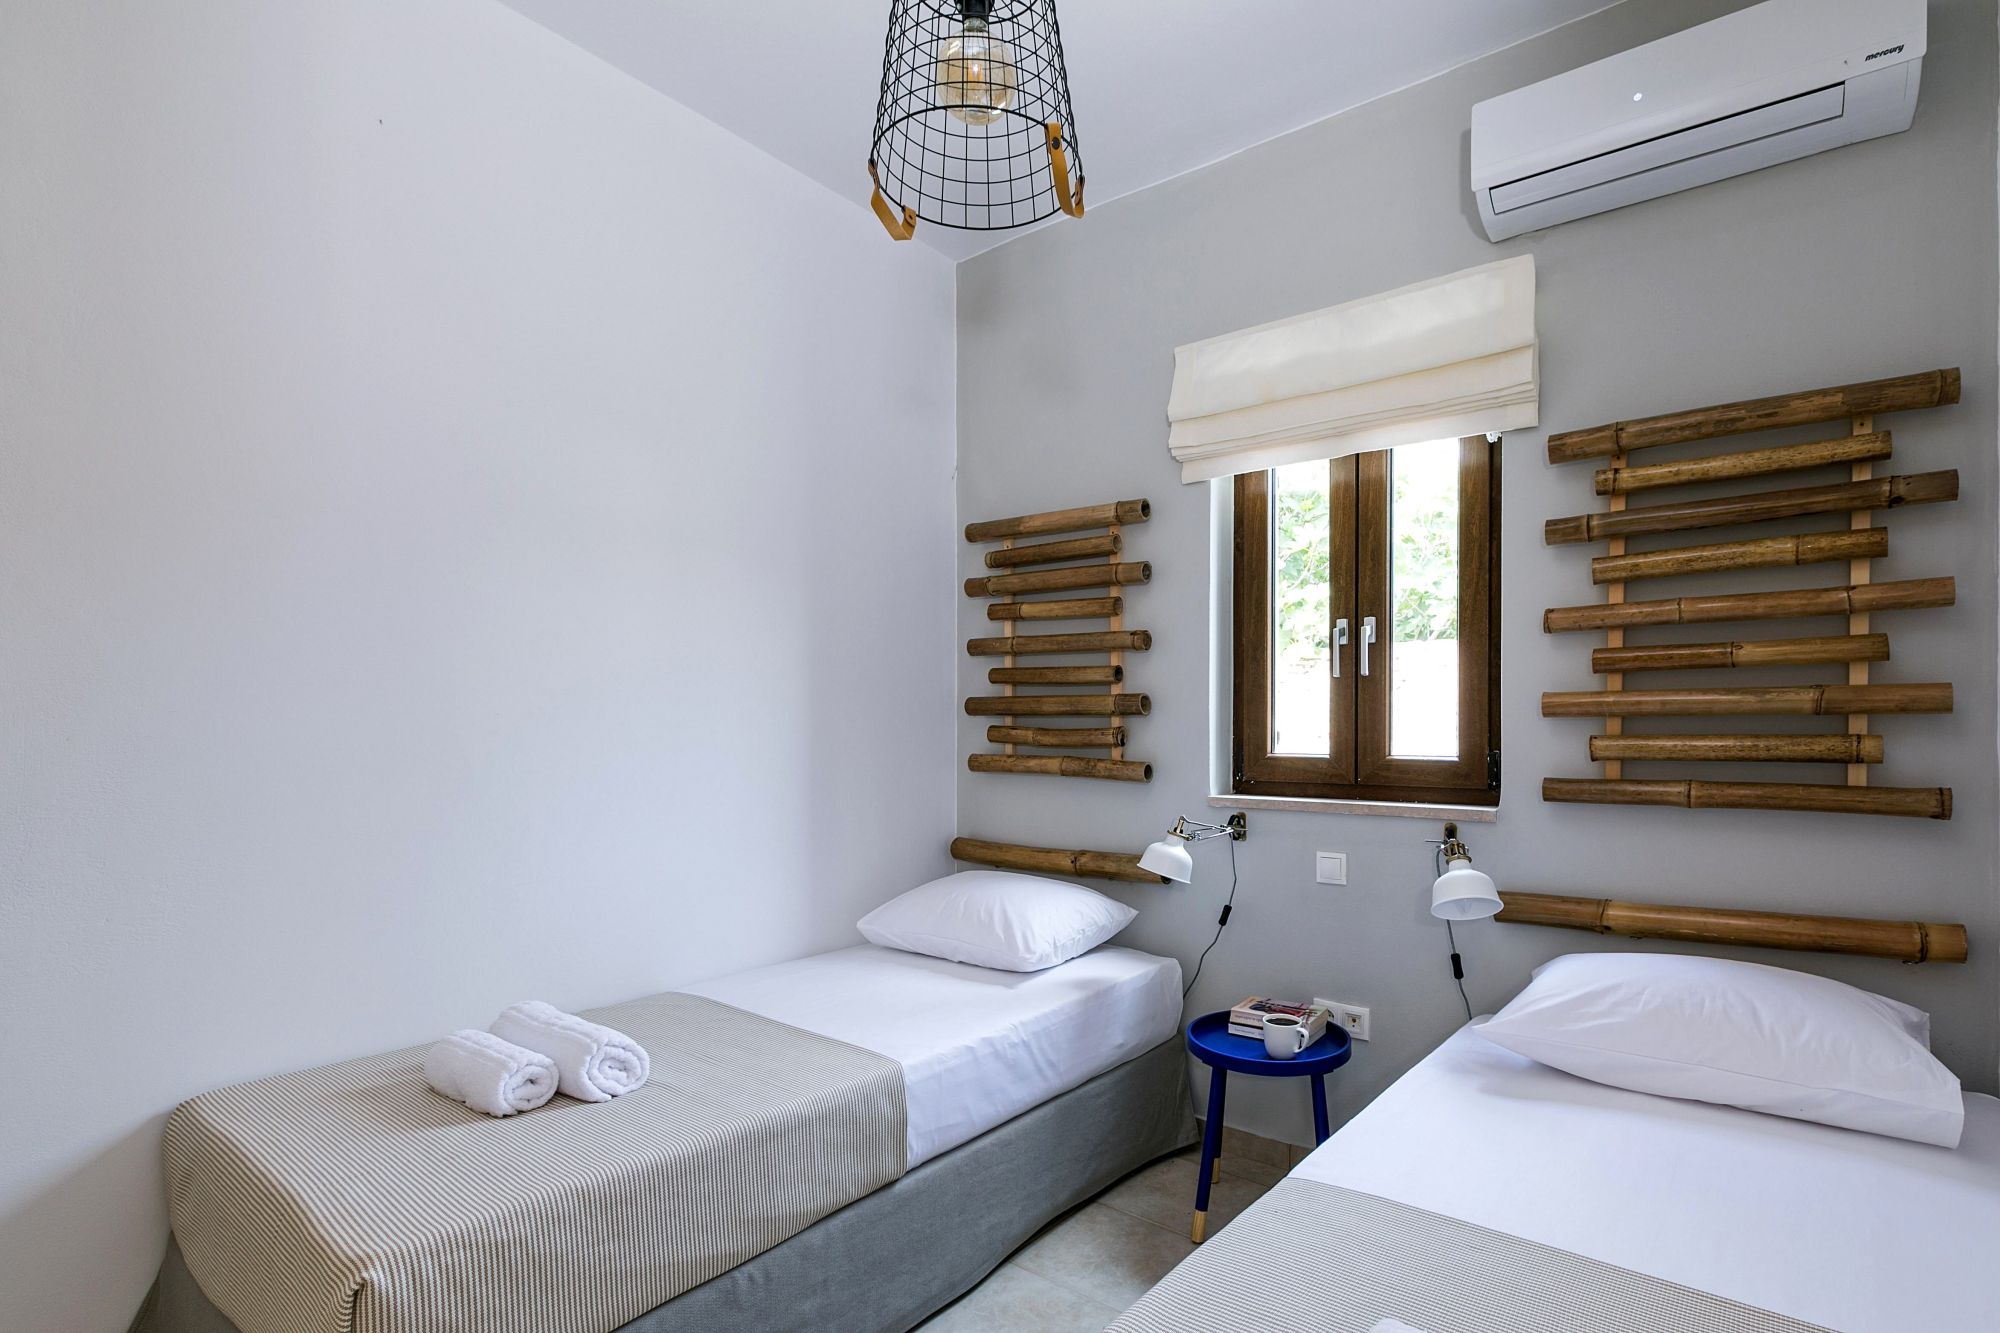 Modern twin bedroom with brown bamboo masts over the beds, a metallic blue bedside table, white wall lights and a window between the beds.